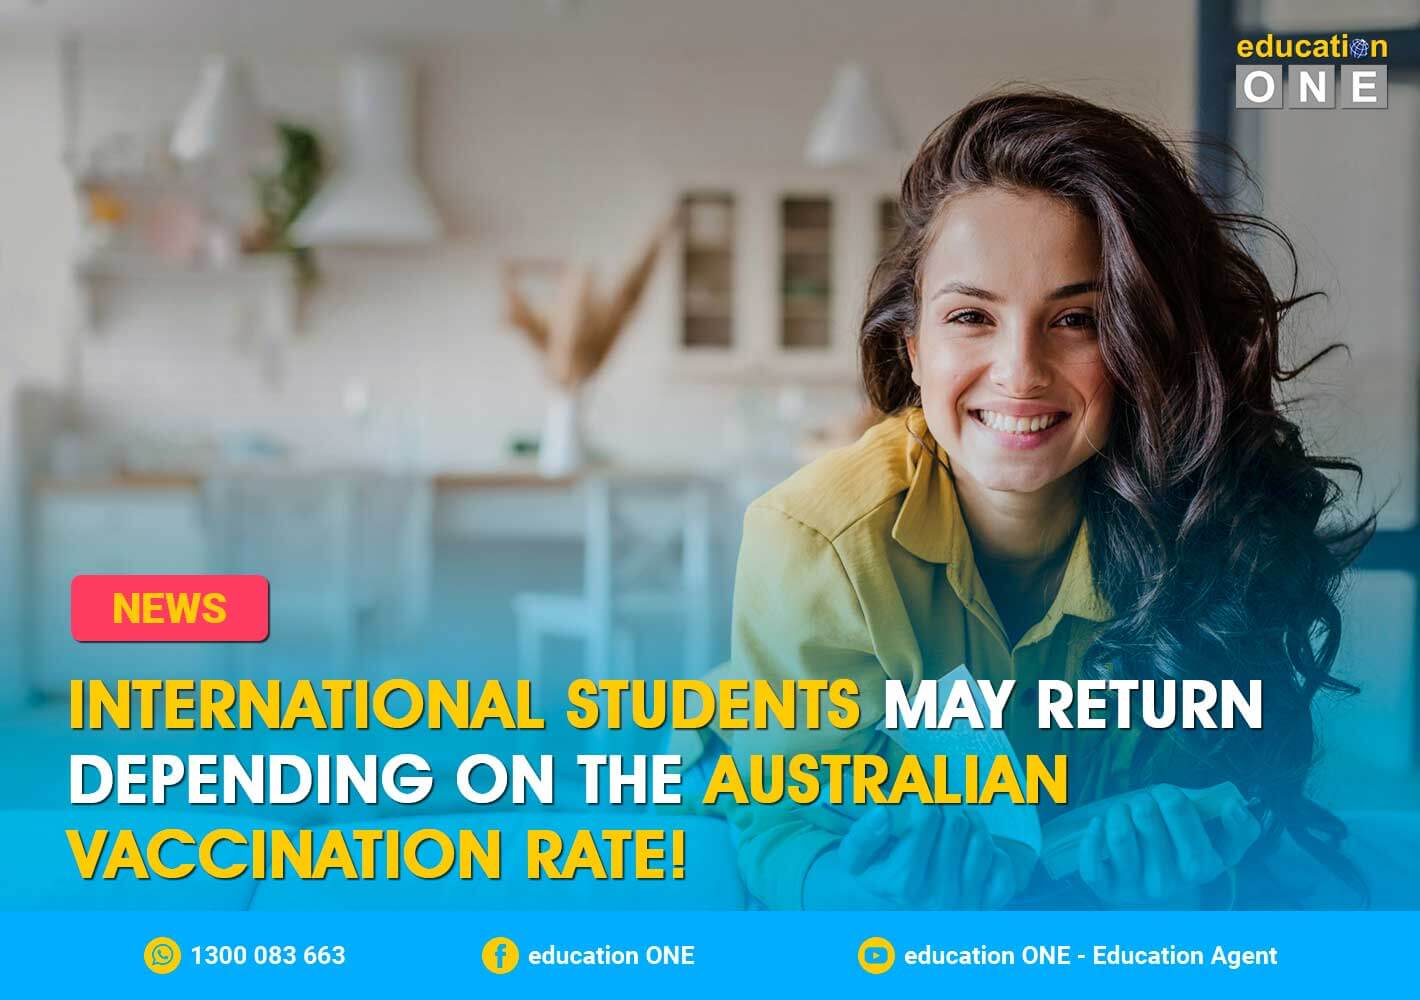 International student return to Australia depend on vaccination rate